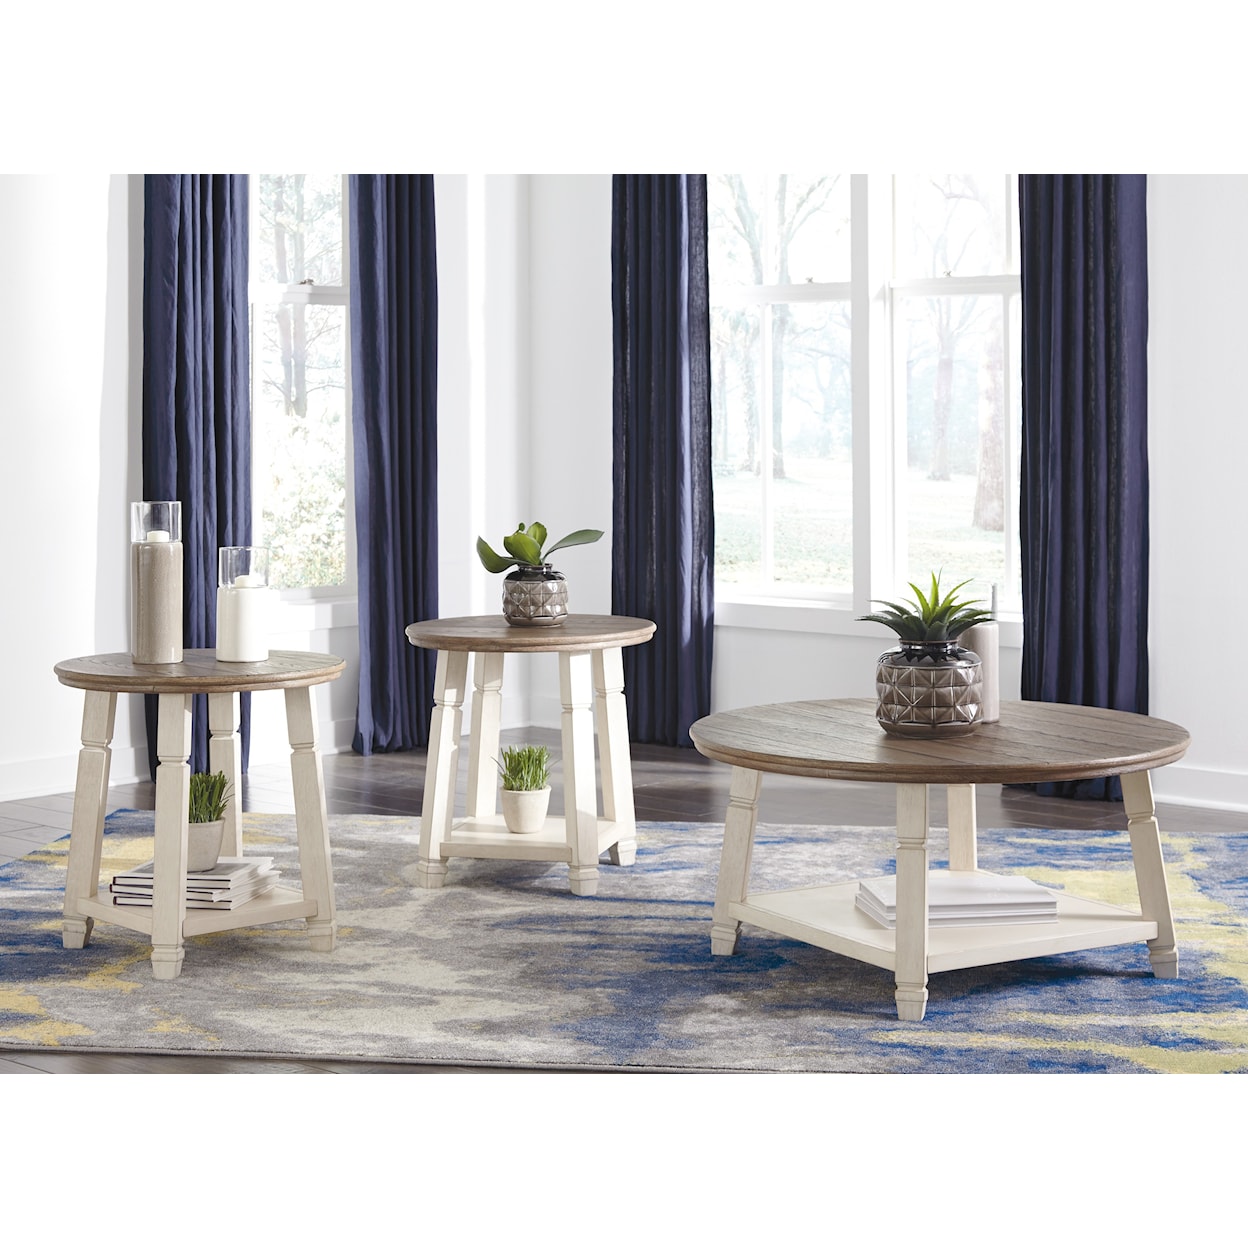 Ashley Furniture Signature Design Bolanbrook Occasional Table Group